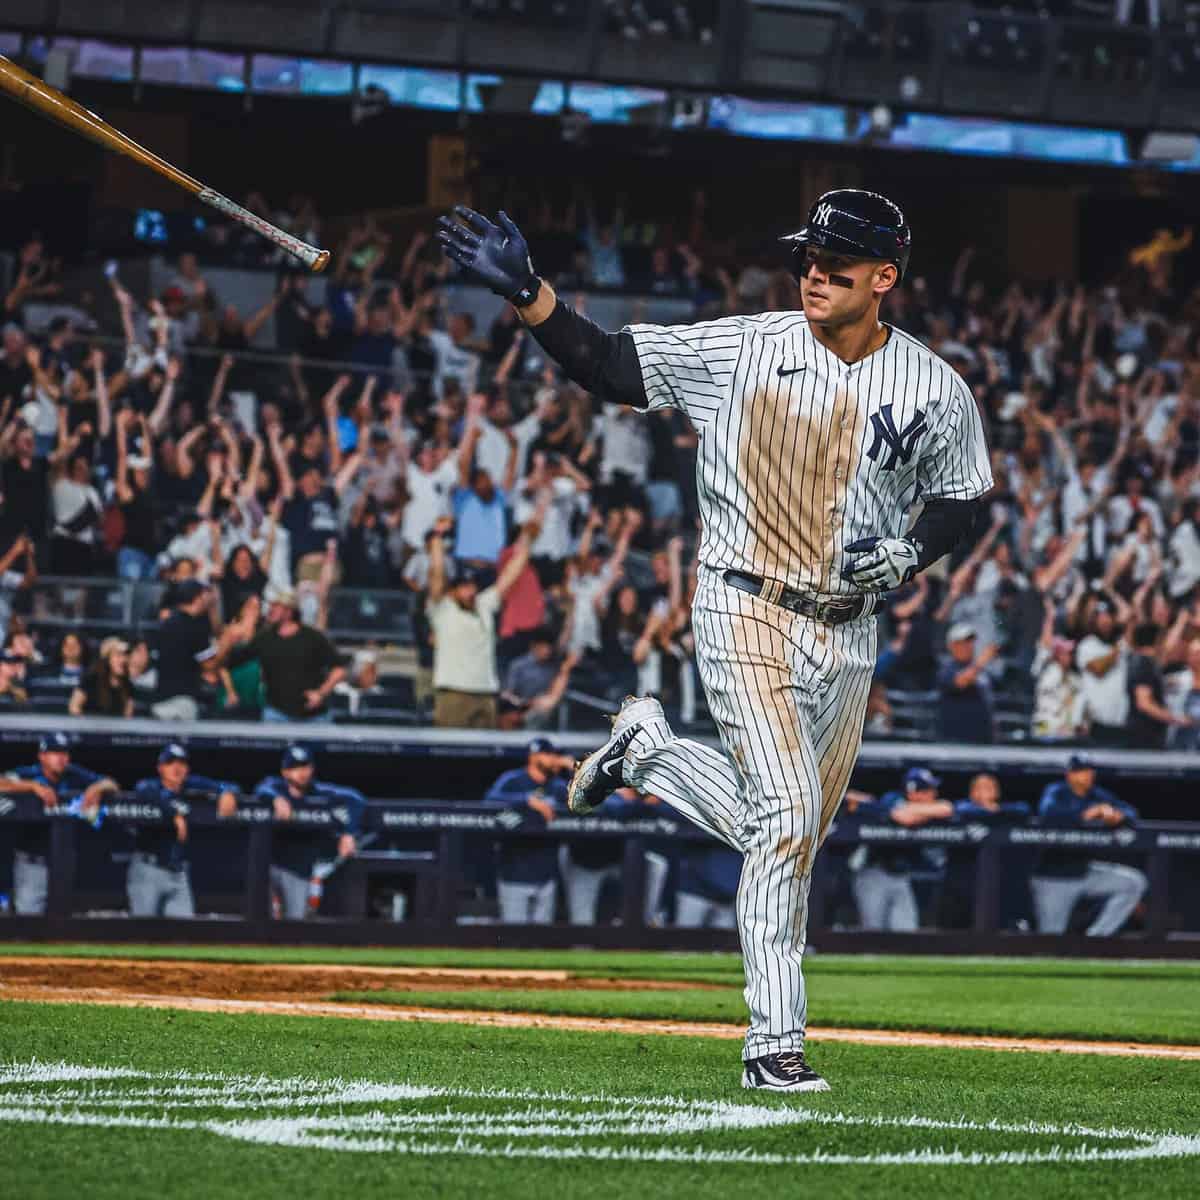 Rizzo hits his 1st HR since May 20 and goes 4 for 4 as the Yankees